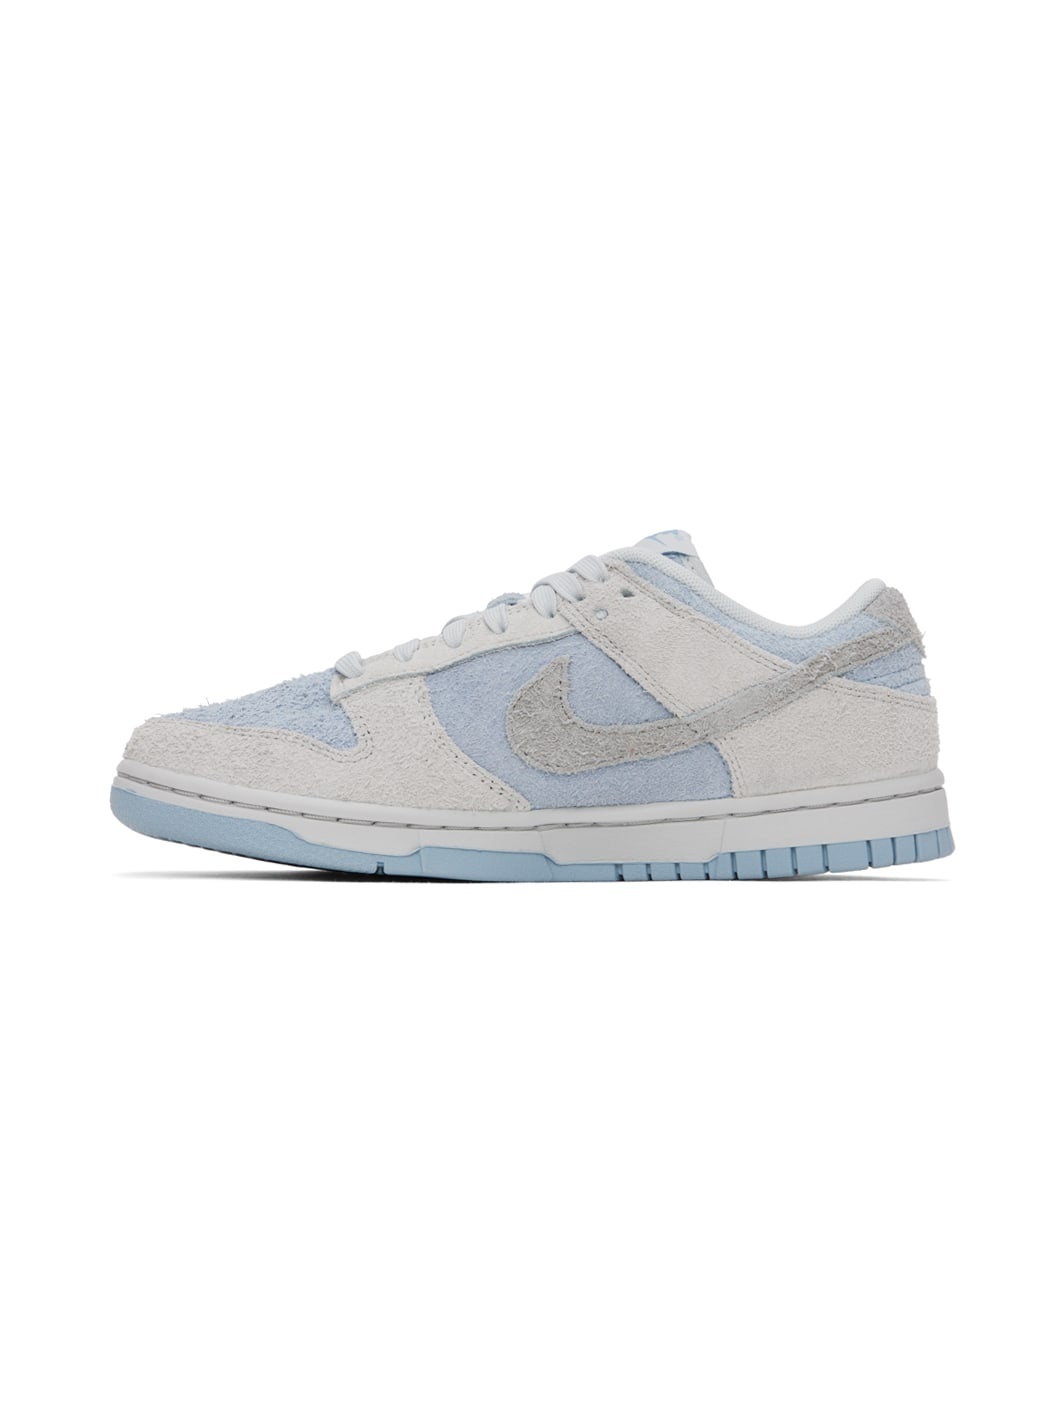 Blue & Gray Dunk Low Sneakers - 3